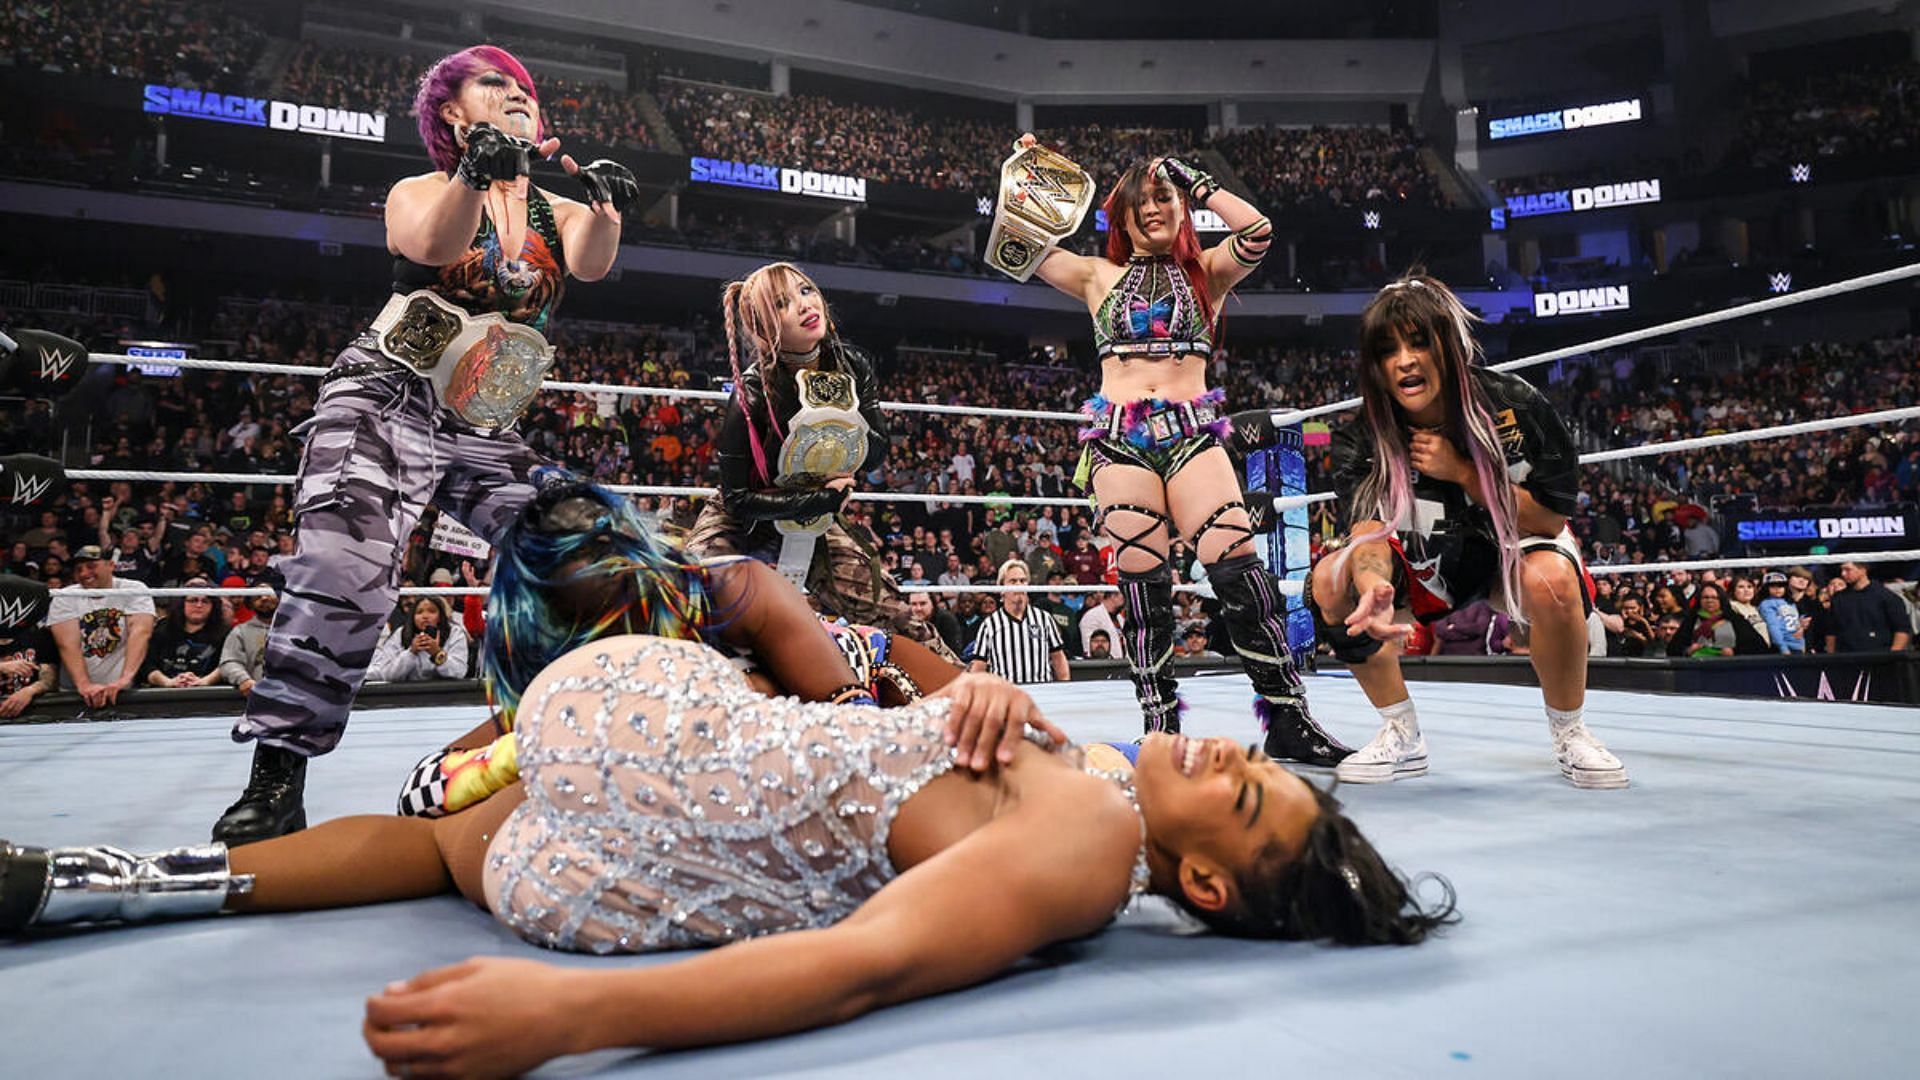 Bianca Belair was taken out by Damage CTRL on SmackDown